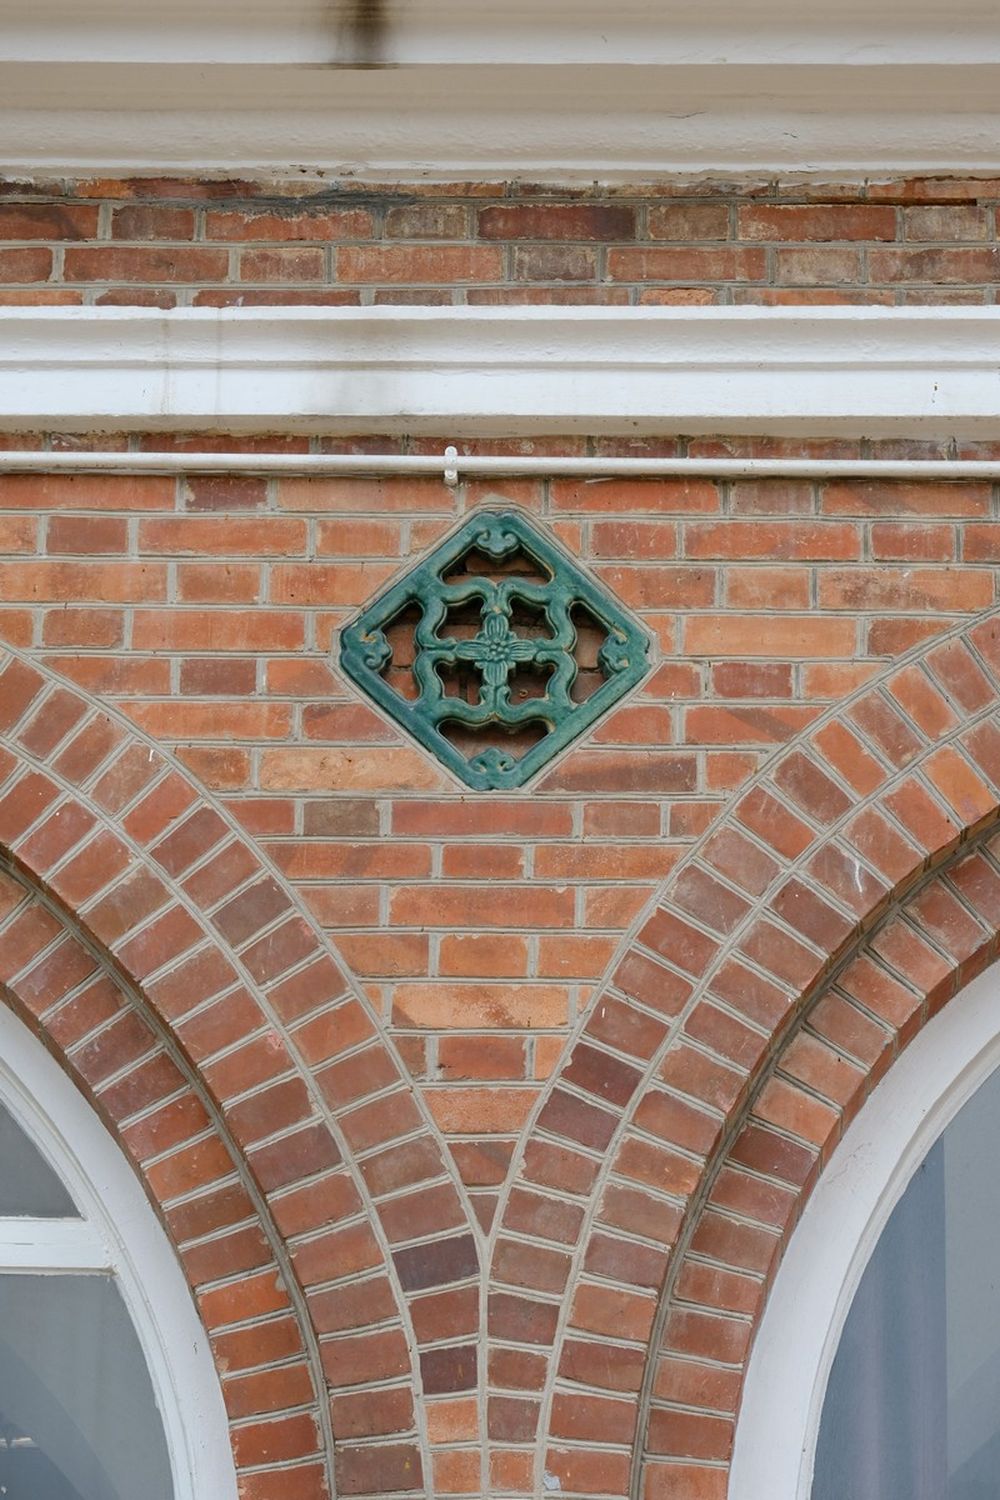 The May Hall and Eliot Hall were built with the red brick wall and Chinese-style ceramic grilles, which was a very rare decoration.